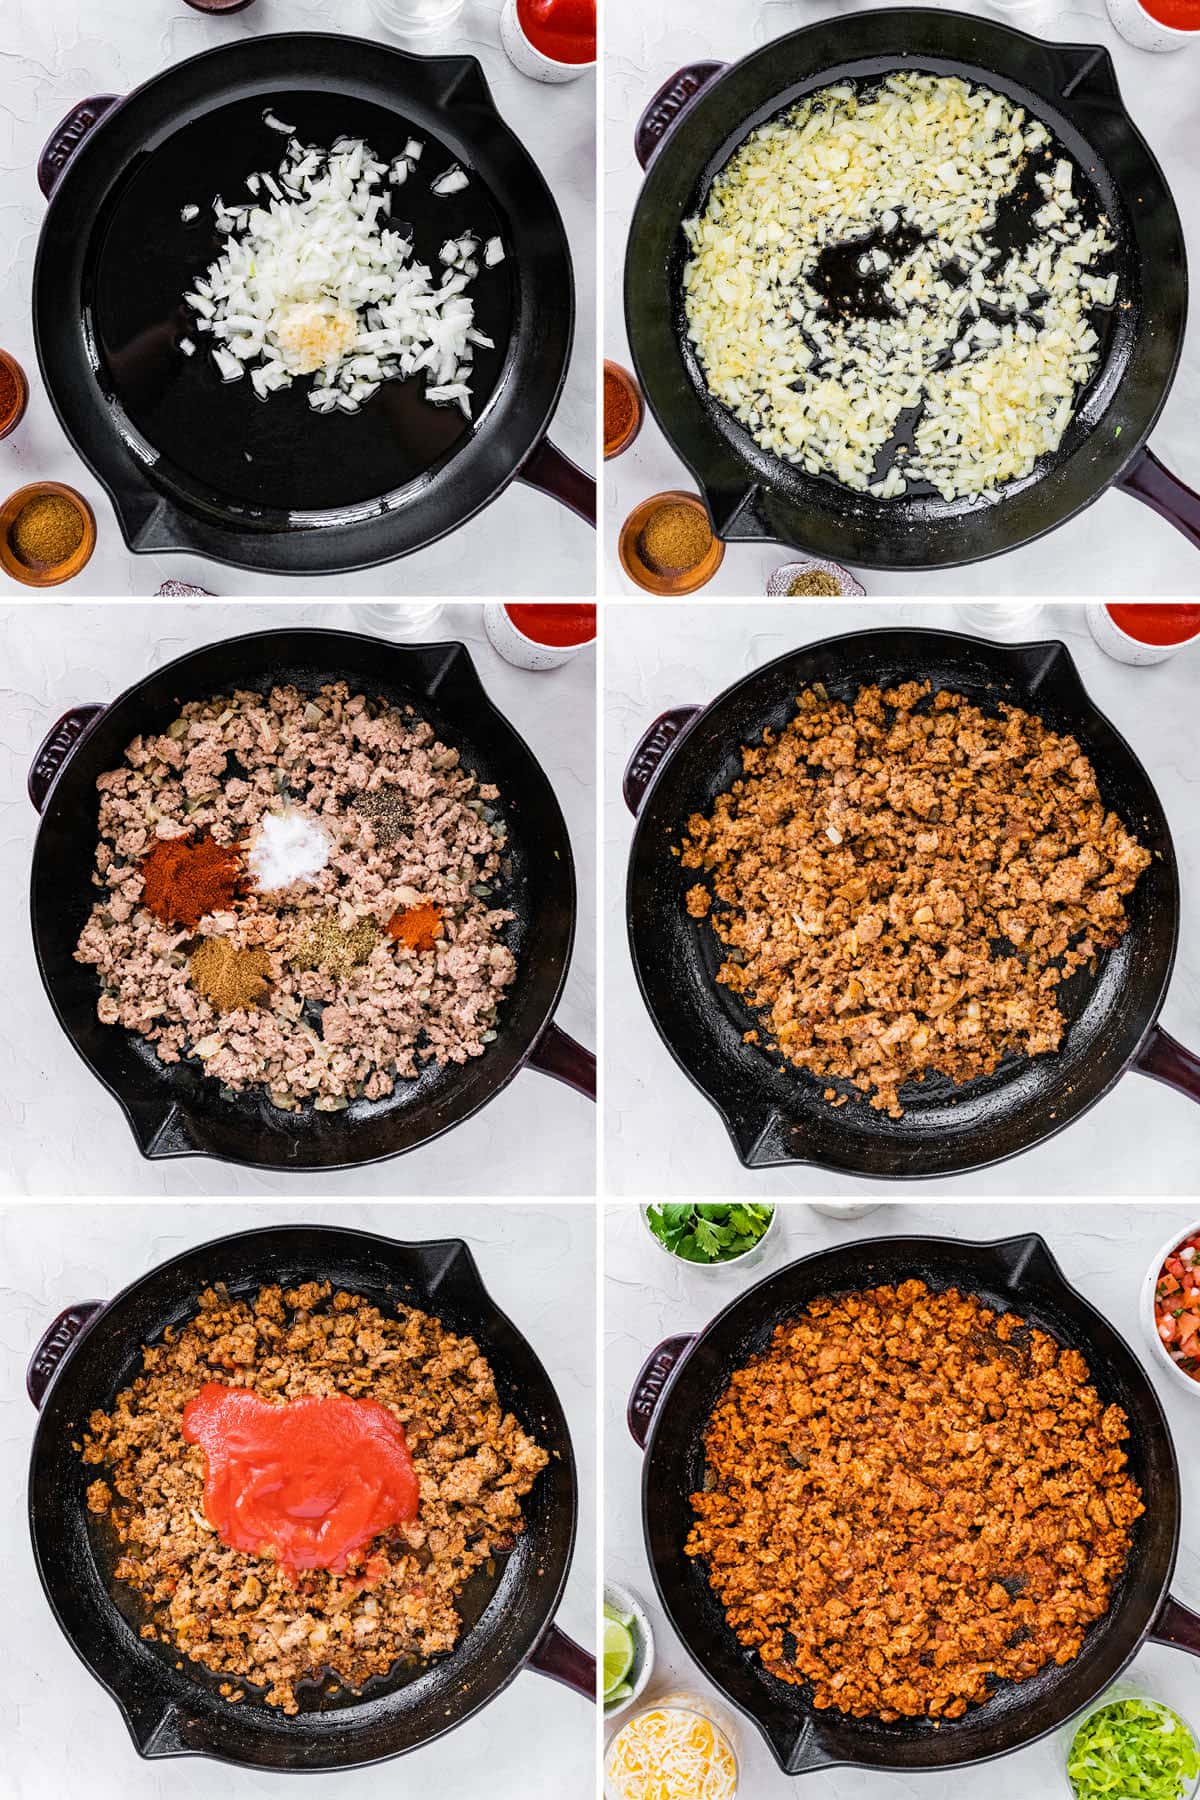 Collage of six photos showing how to make turkey taco meat in a skillet: cooking garlic and onions, adding ground turkey, spices and tomato sauce.